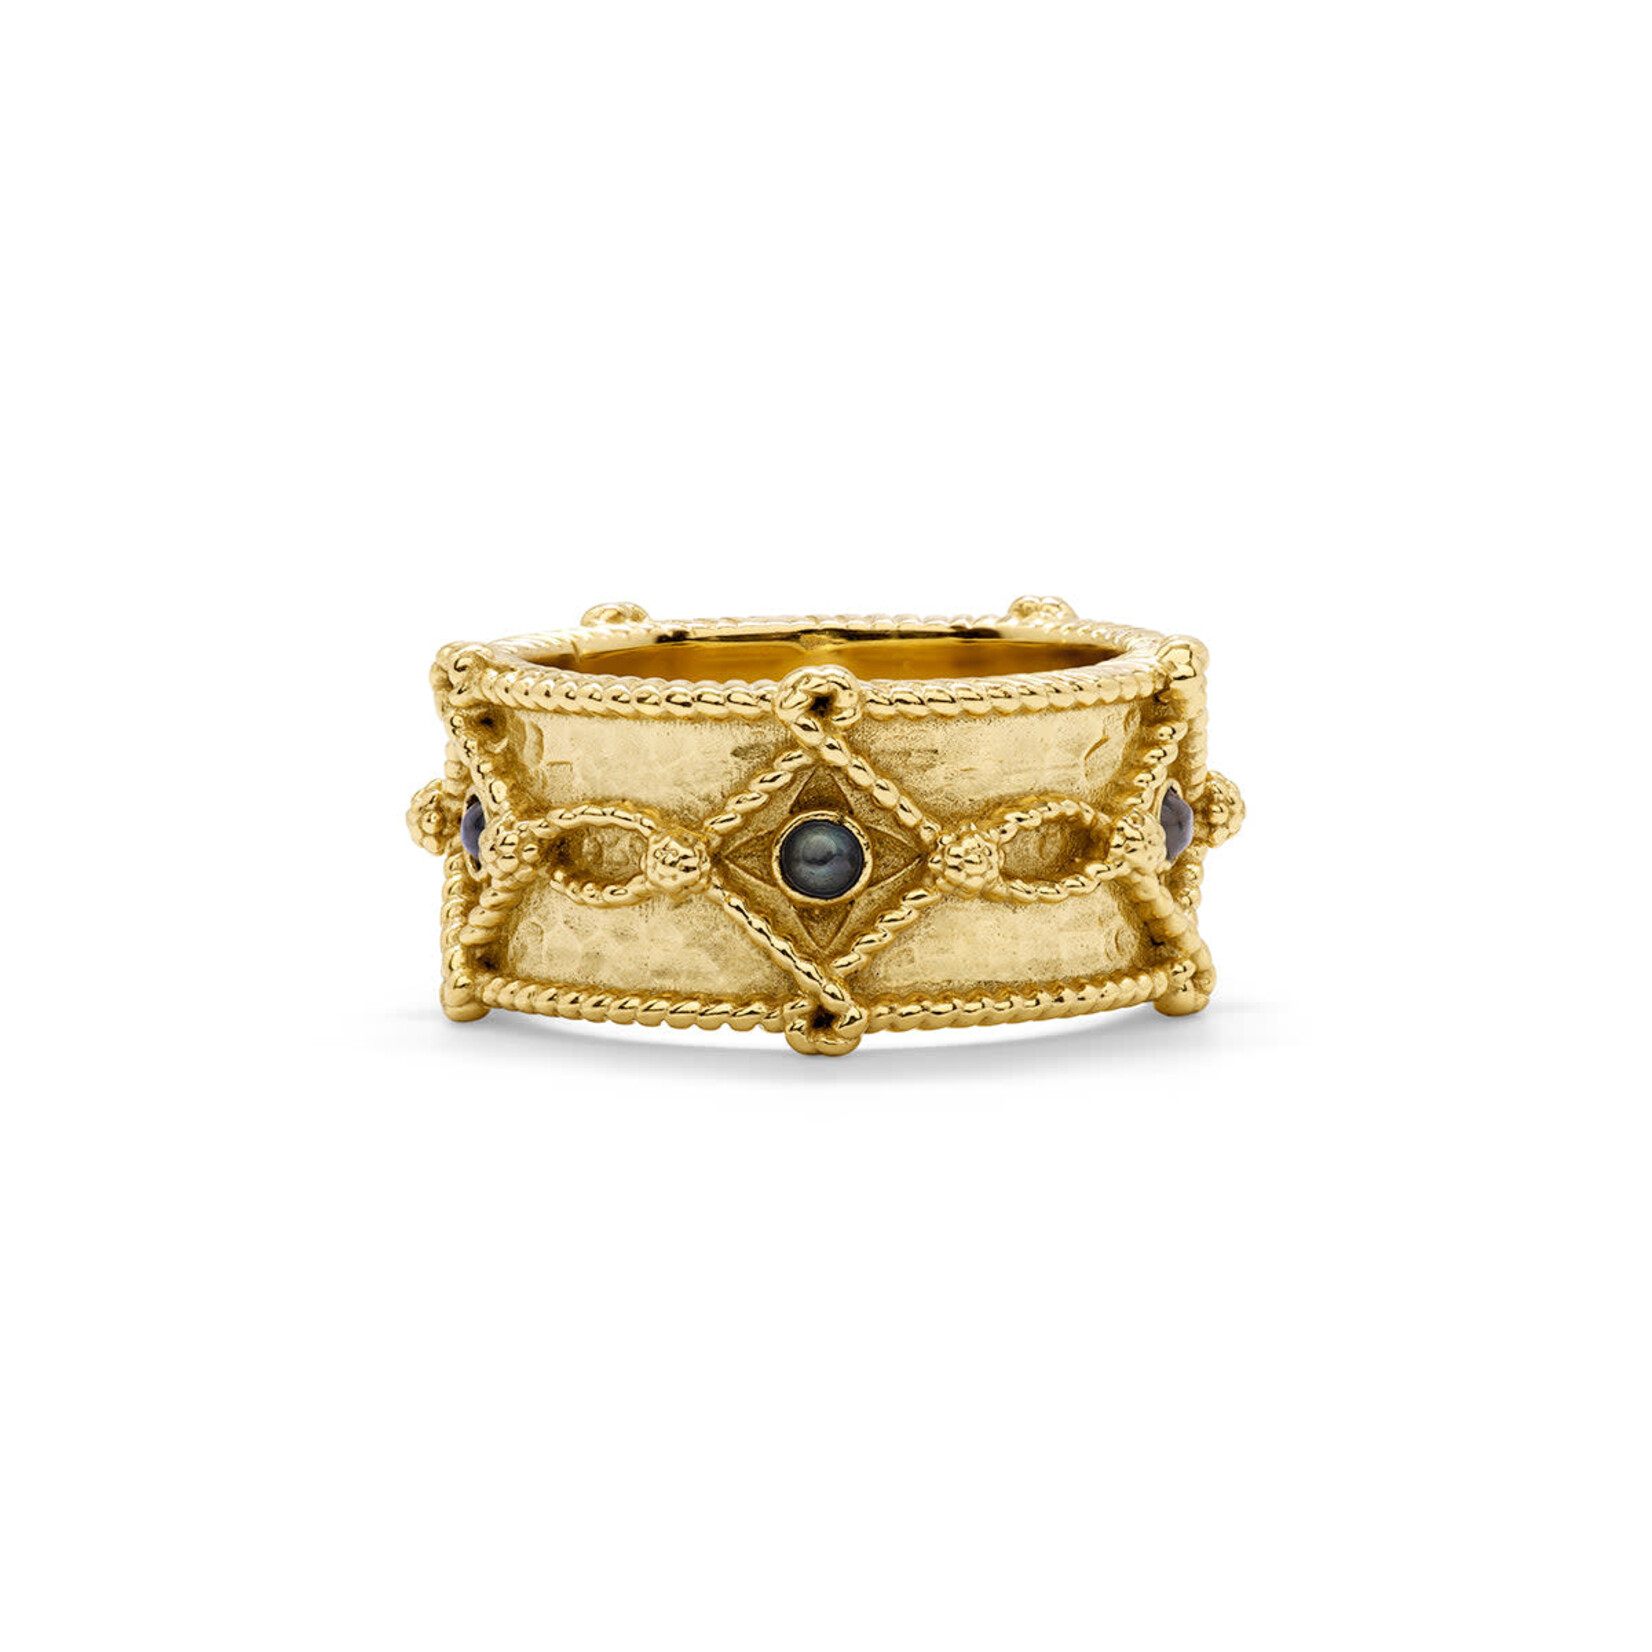 CAPUCINE DE WULF Victoria Ring Band in Hammered Gold/Blue Labradorite, Size 8